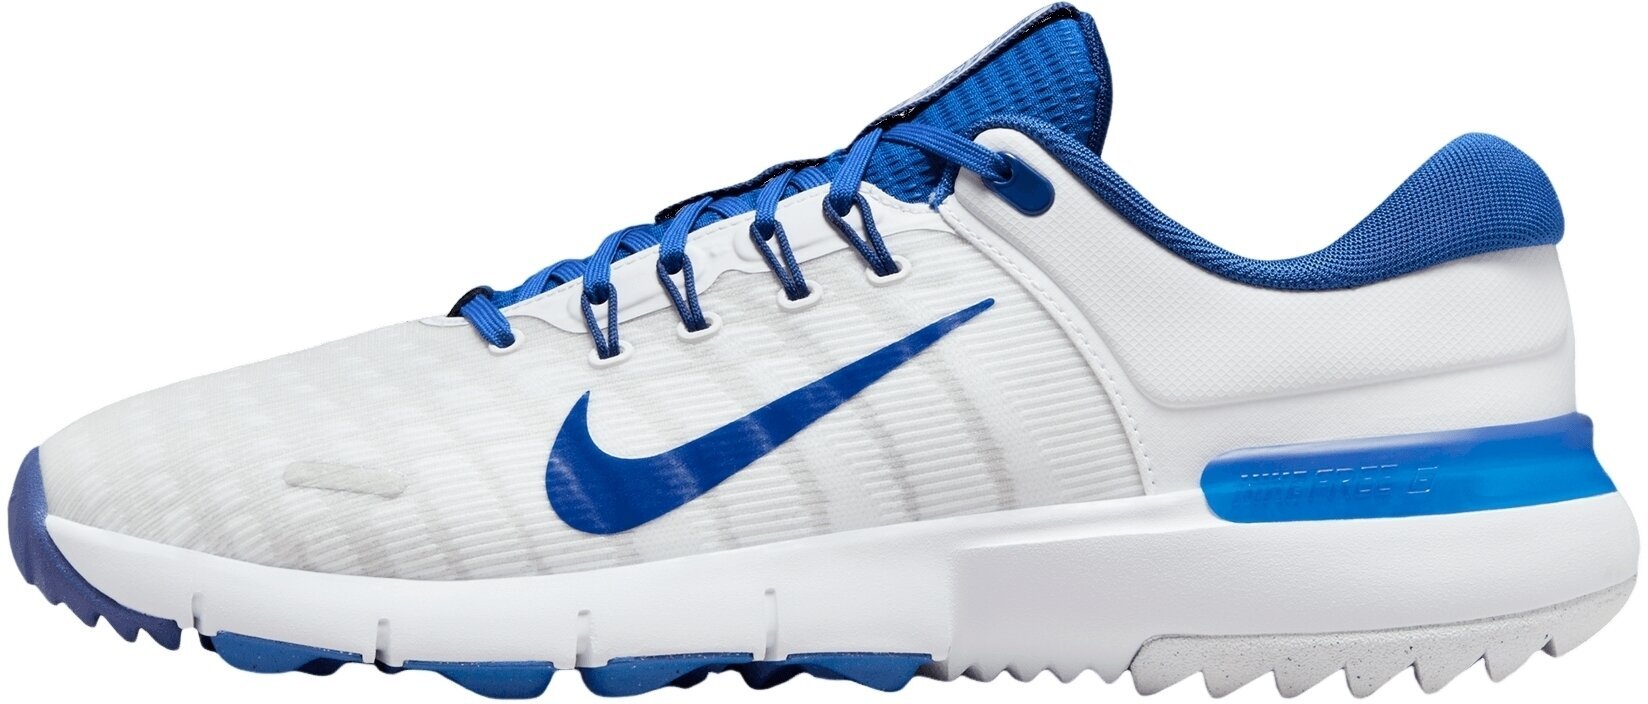 Chaussures de golf pour hommes Nike Free Golf Unisex Shoes Game Royal/Deep Royal Blue/Football Grey 44